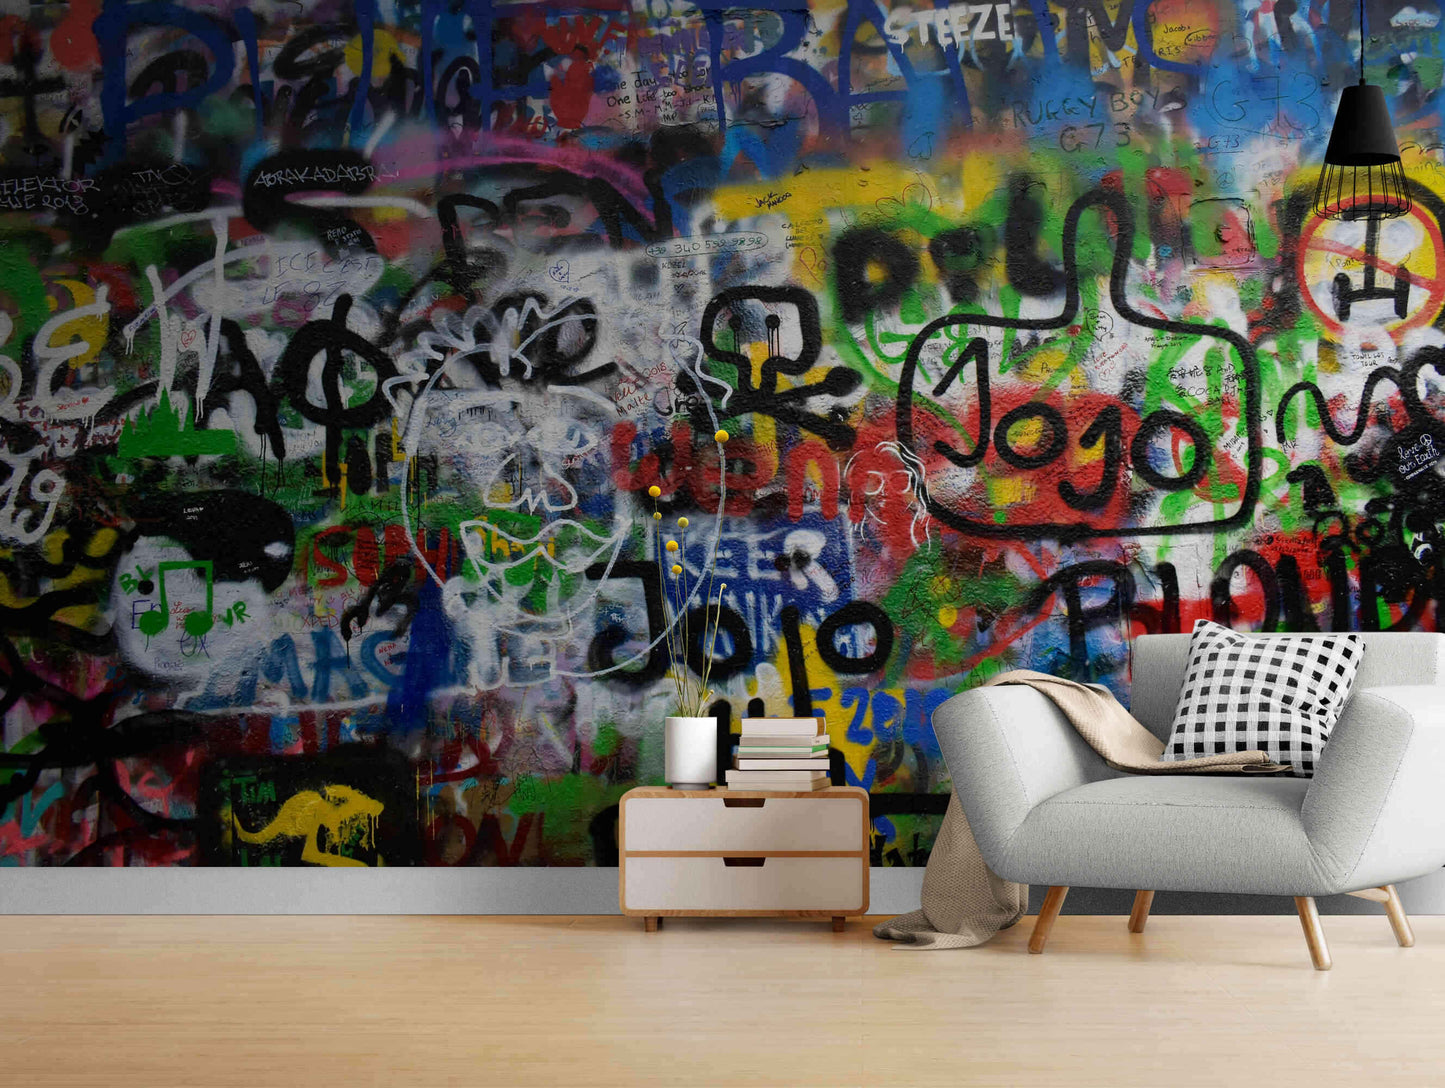 Abstract graffiti designs on peel and stick mural wallpape